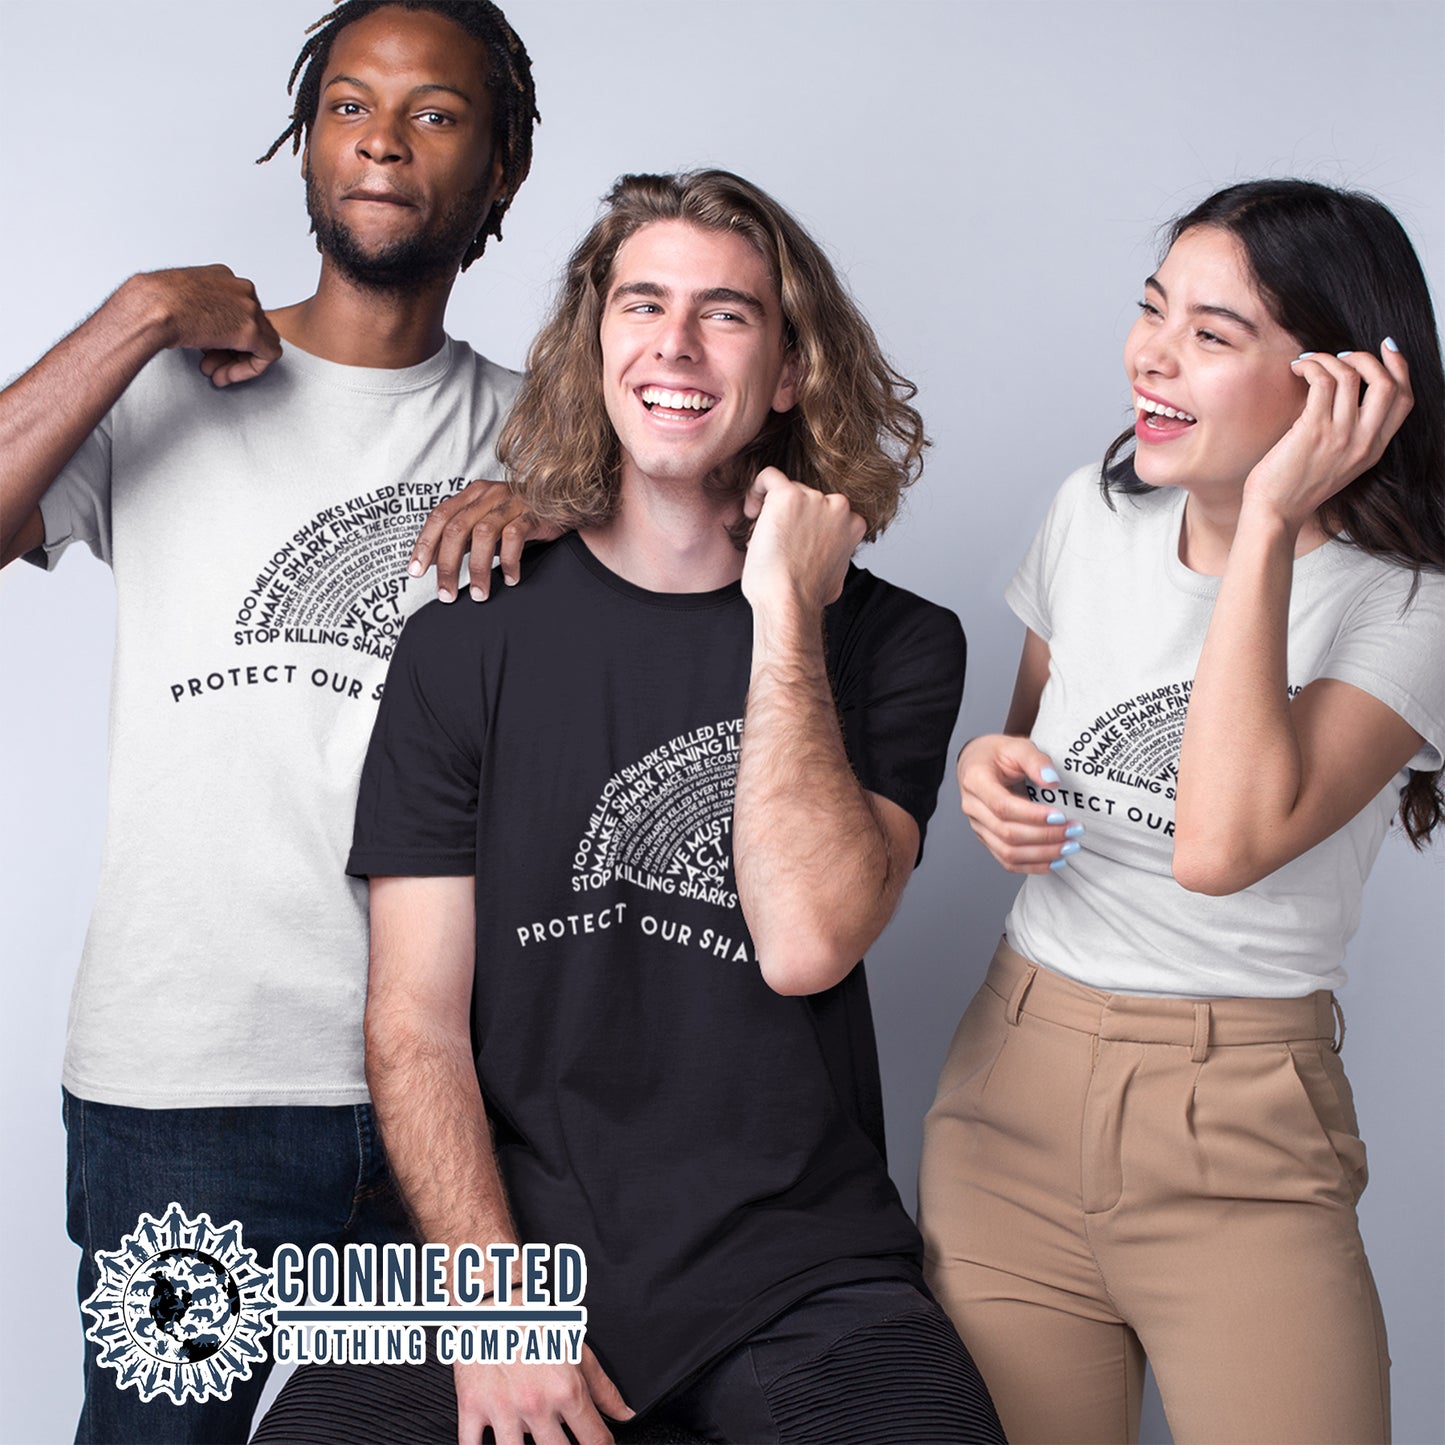 Black and White Protect Our Sharks Short-Sleeve Tees - sweetsherriloudesigns - Ethically and Sustainably Made - 10% of profits donated to shark conservation and ocean conservation